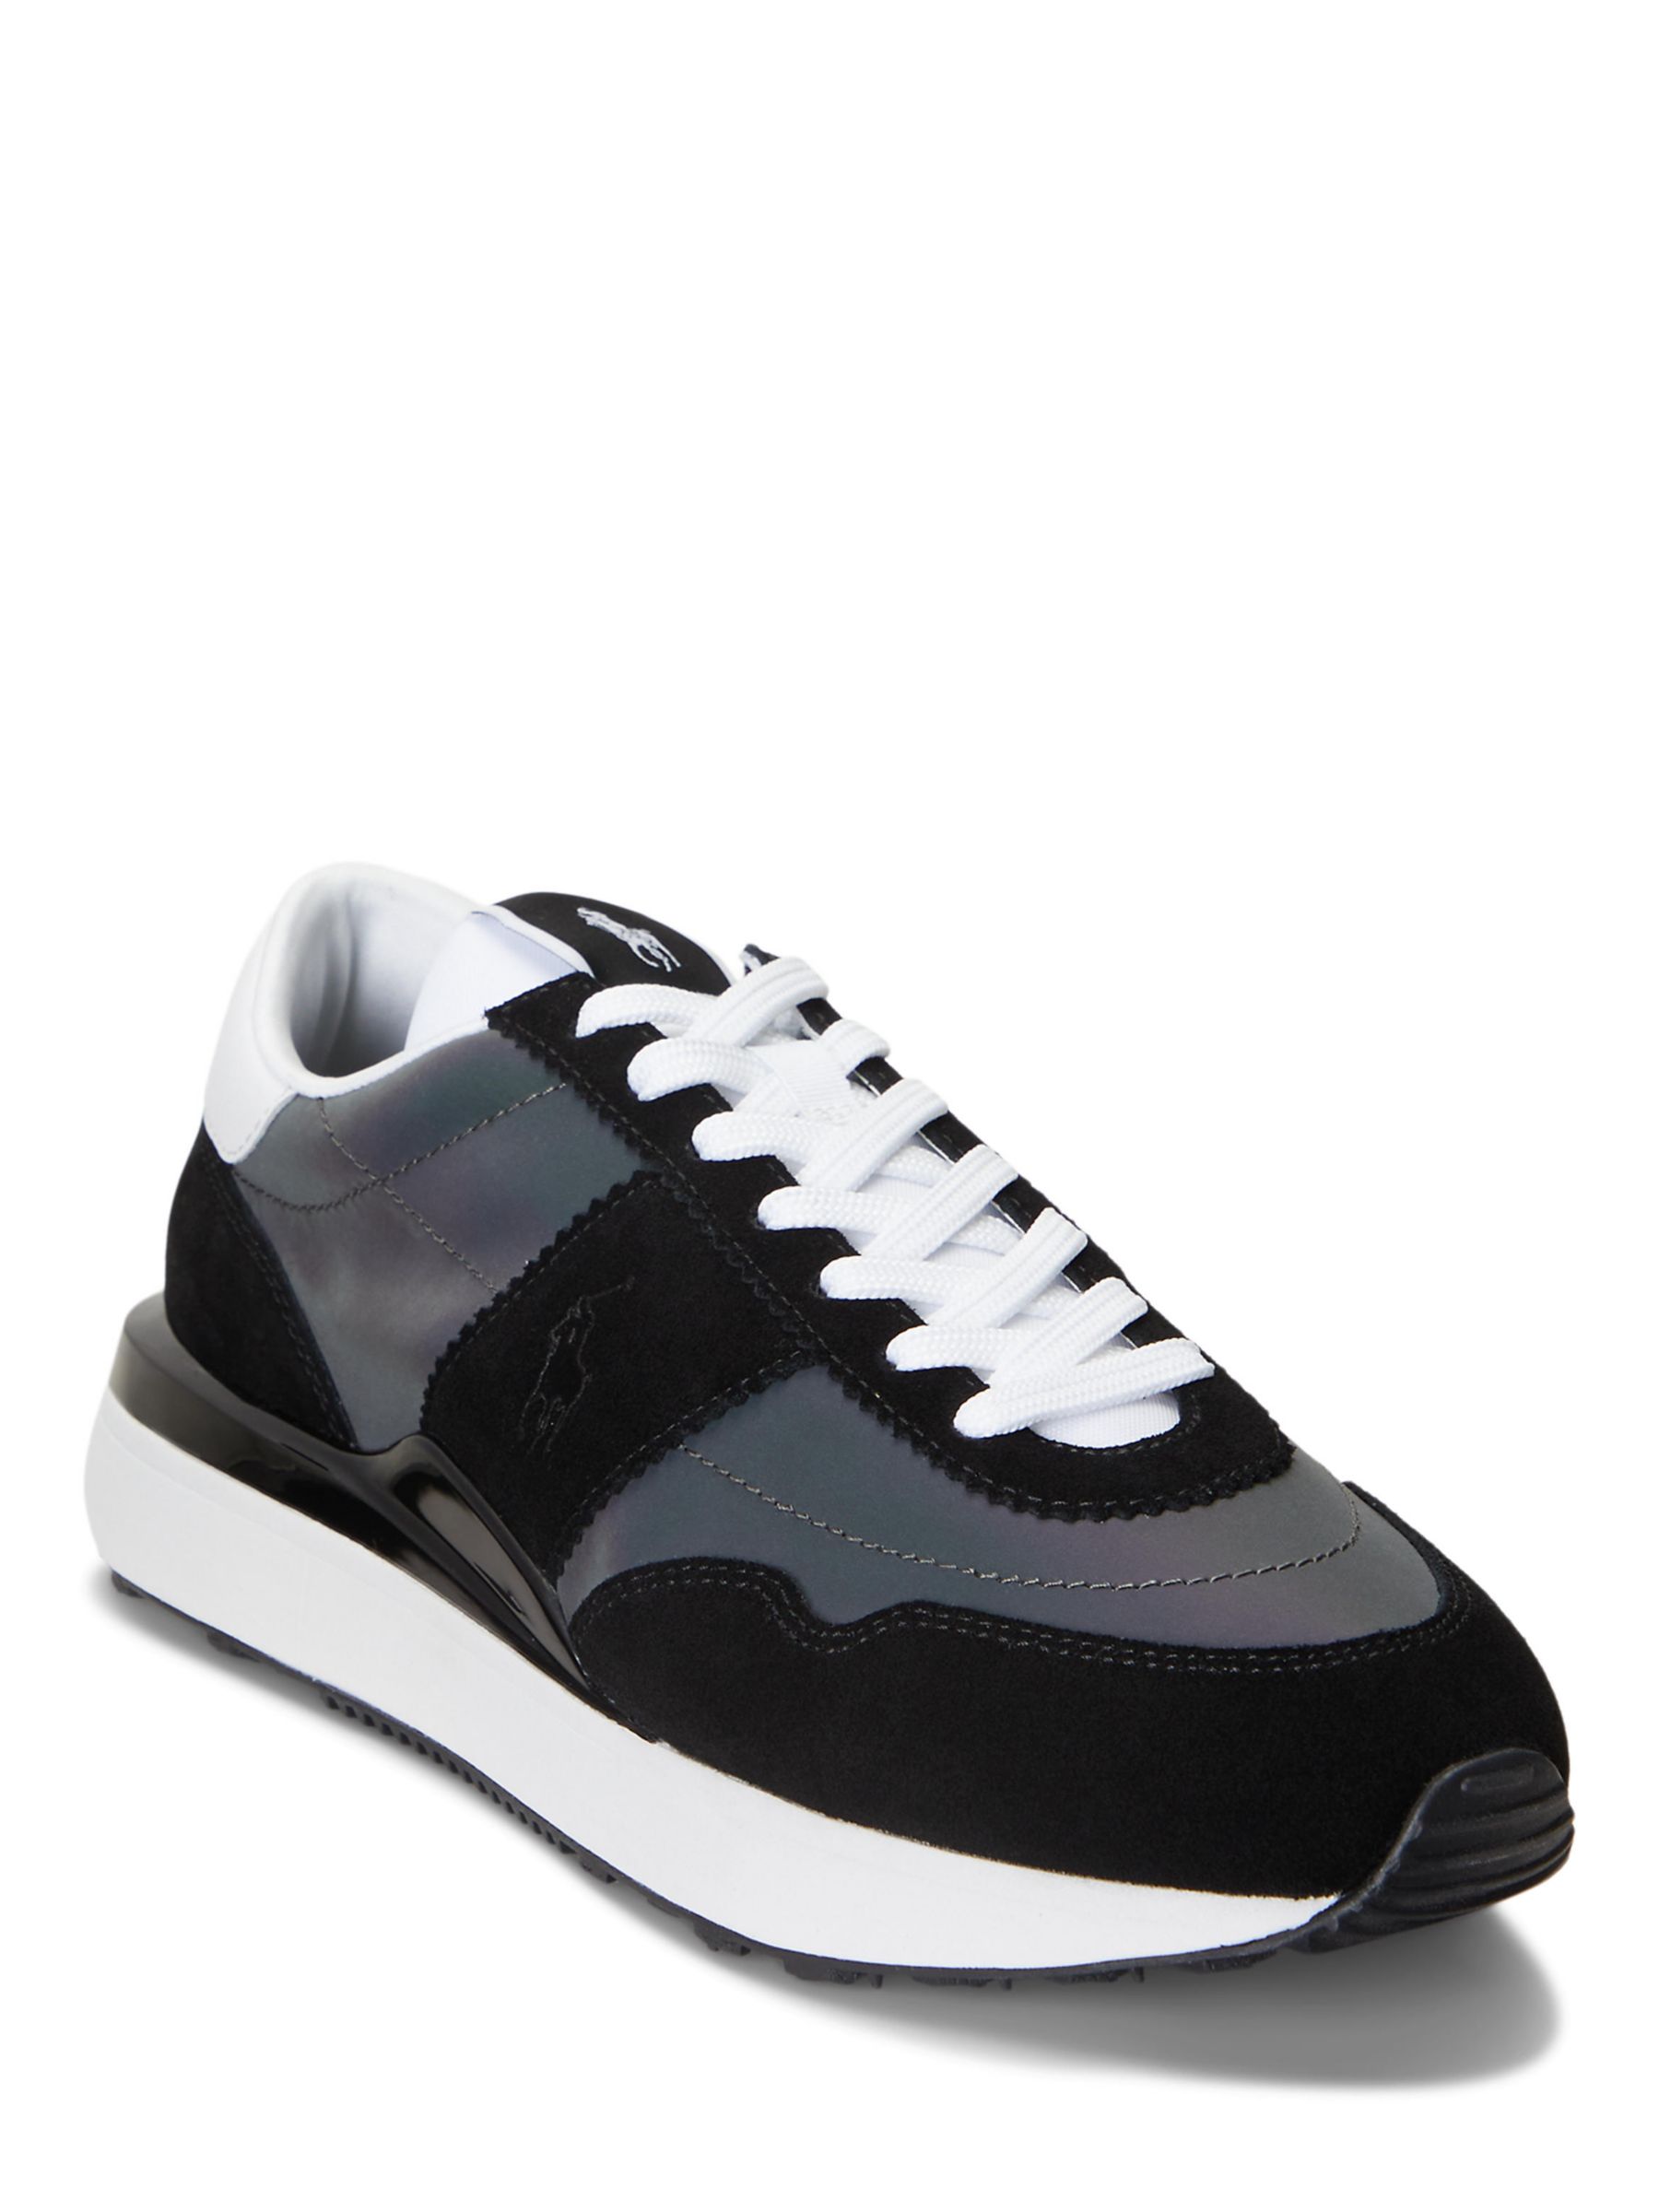 Polo Ralph Lauren Train 89 Suede Trainers, Black Reflective at John ...